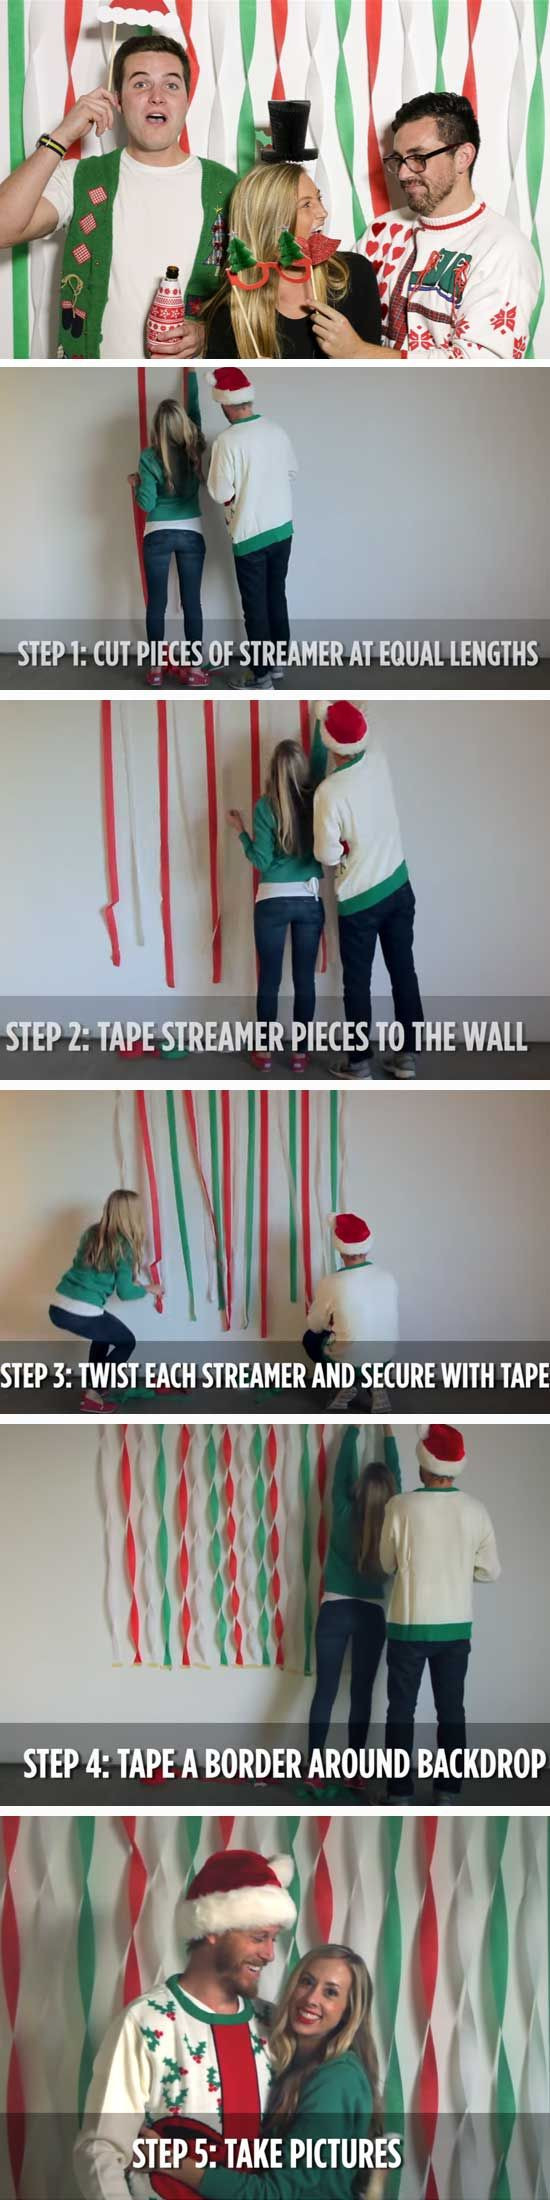 Christmas Party Contest Ideas
 Best 20 Ugly Sweater Party ideas on Pinterest